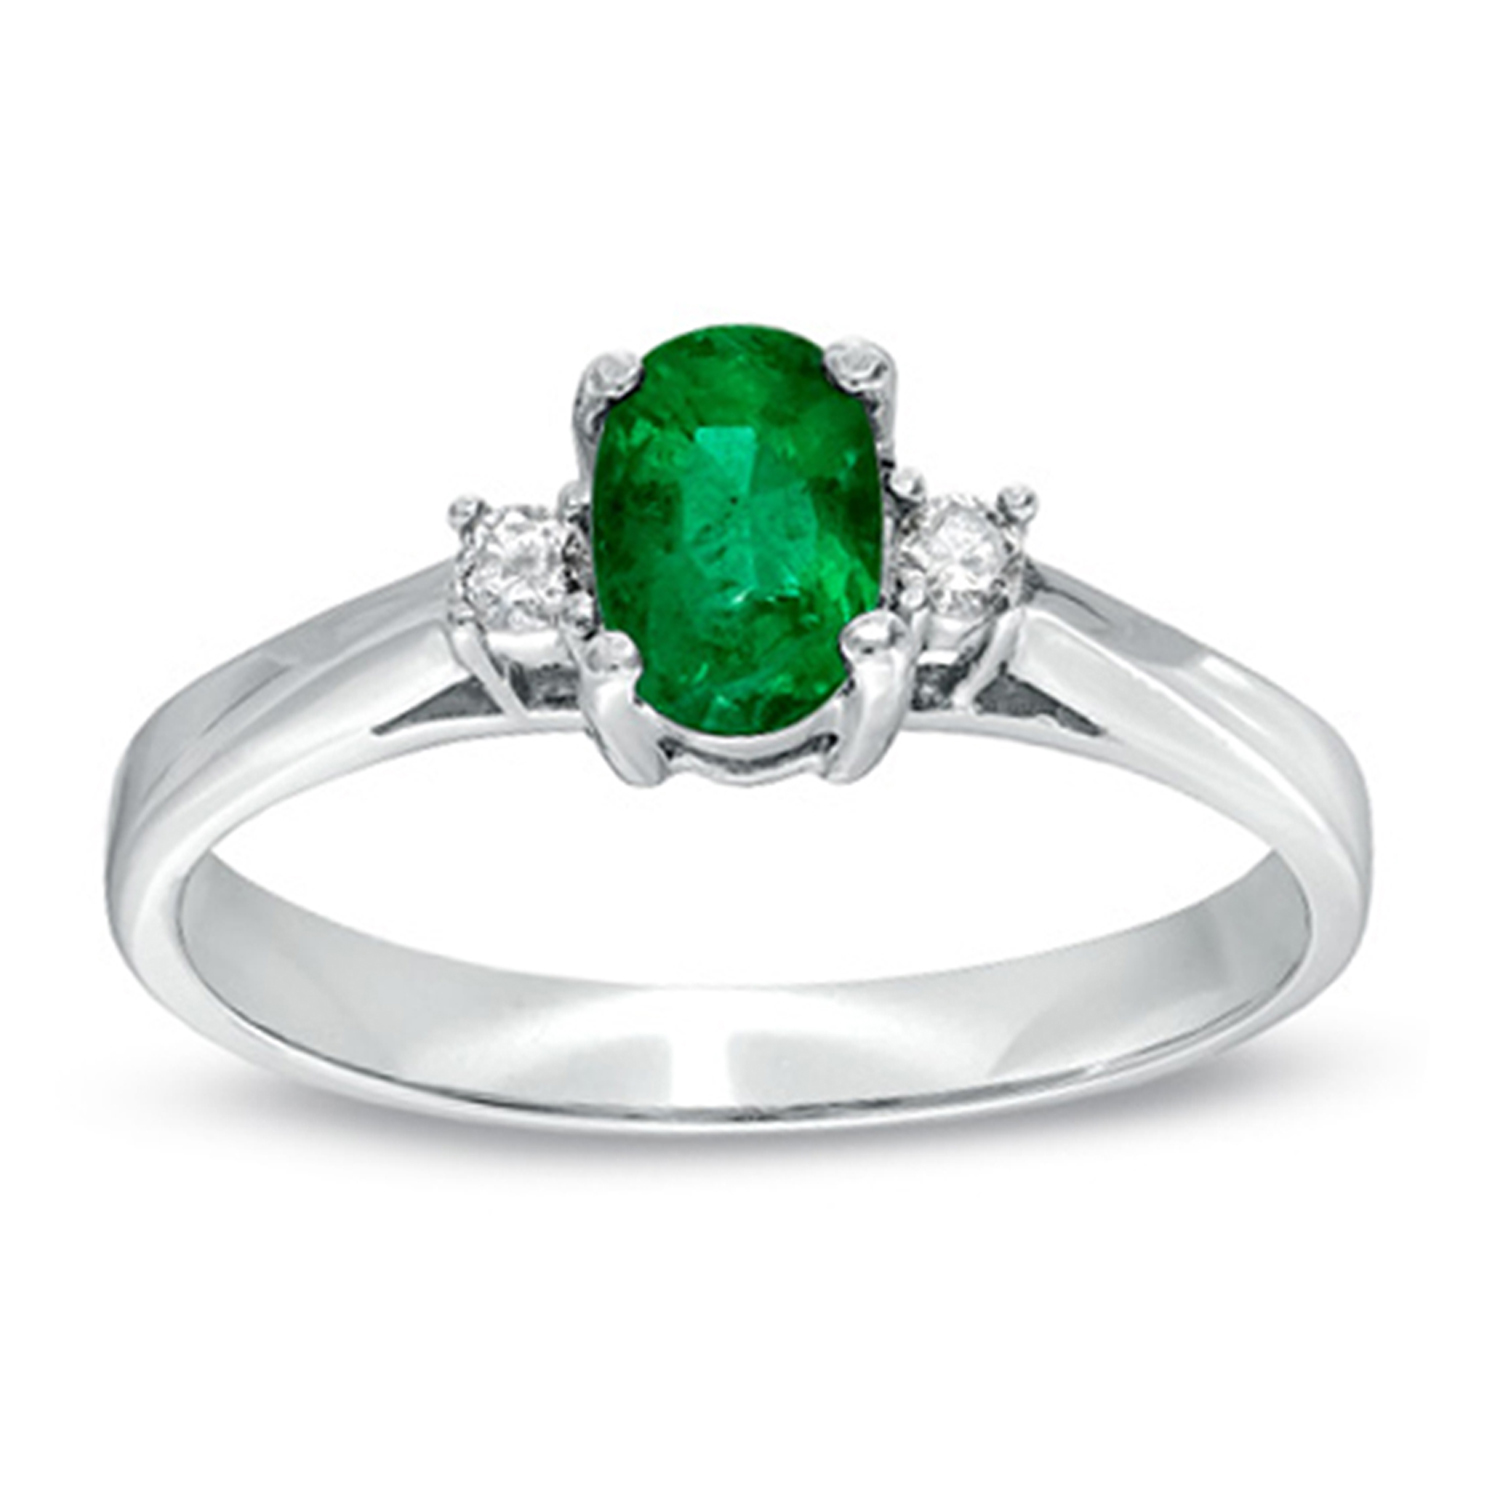 0.45cttw Emerald and Diamond Ring set in 14k Gold